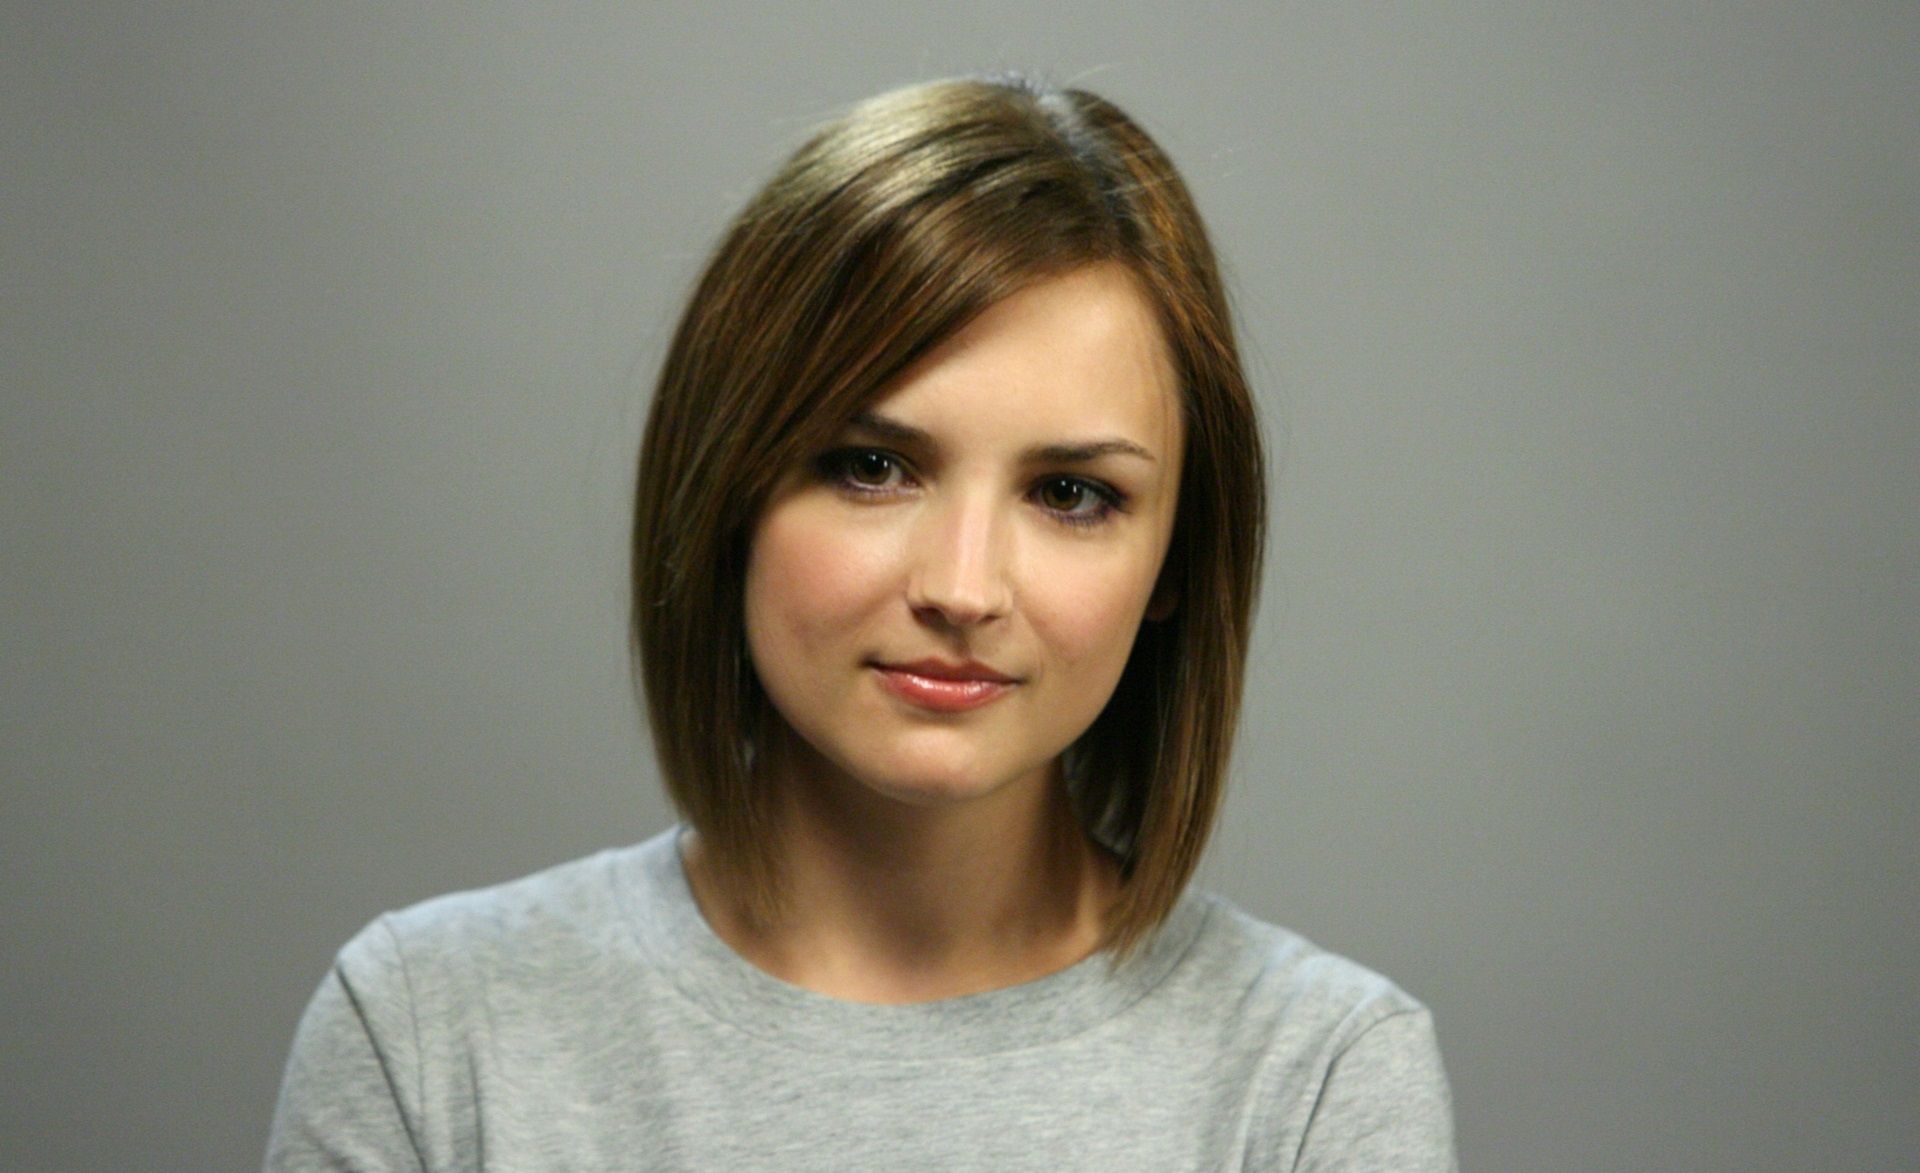 Rachael Leigh Cook Wallpaper Image Photo Picture Background